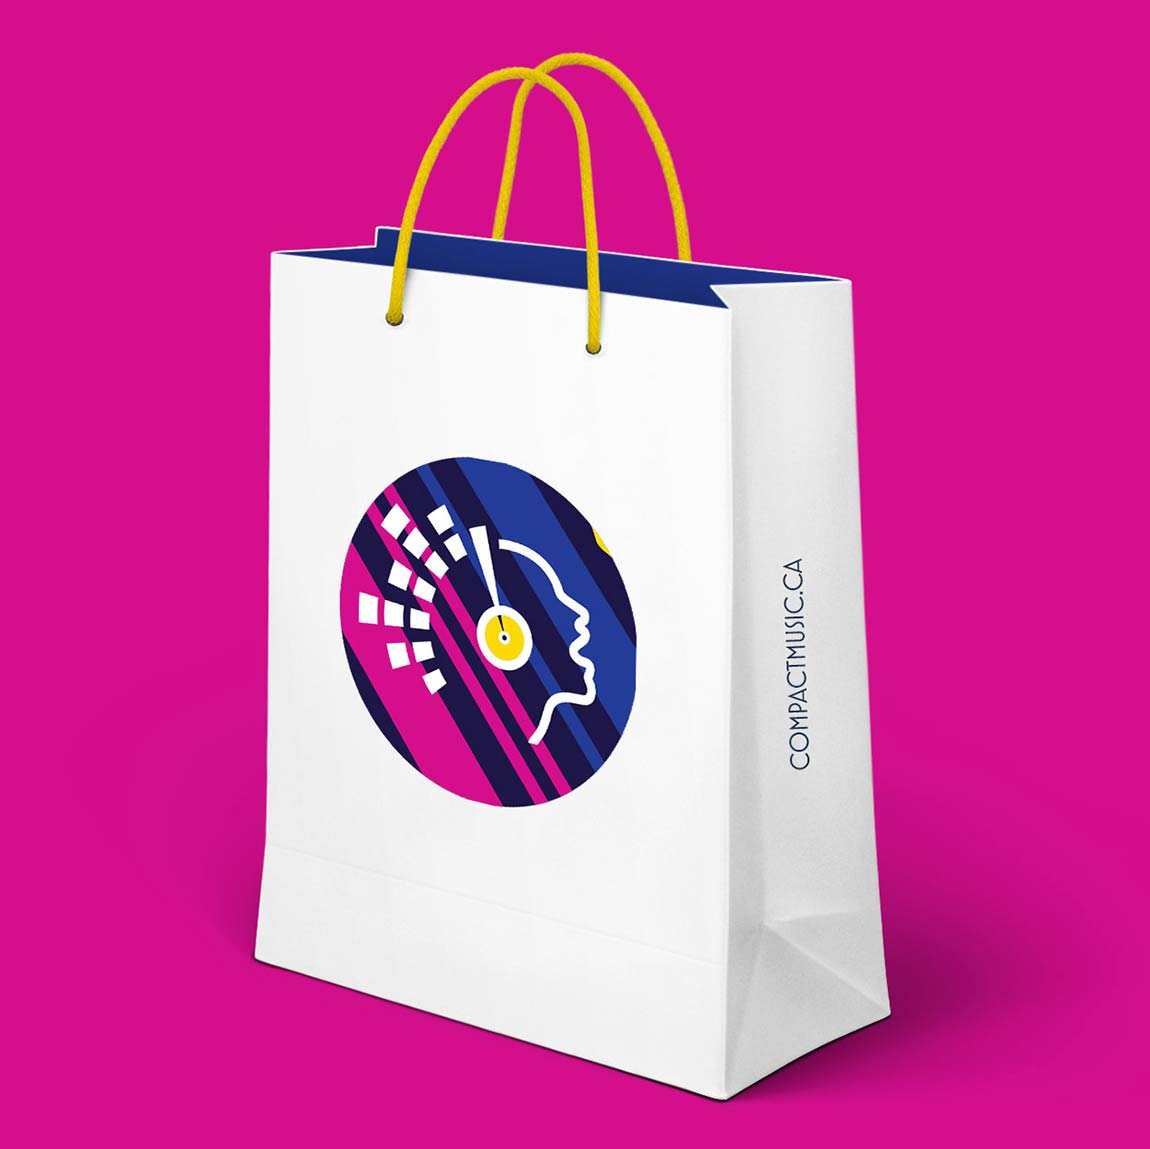 An image of a bag branded with new Compact Music brand